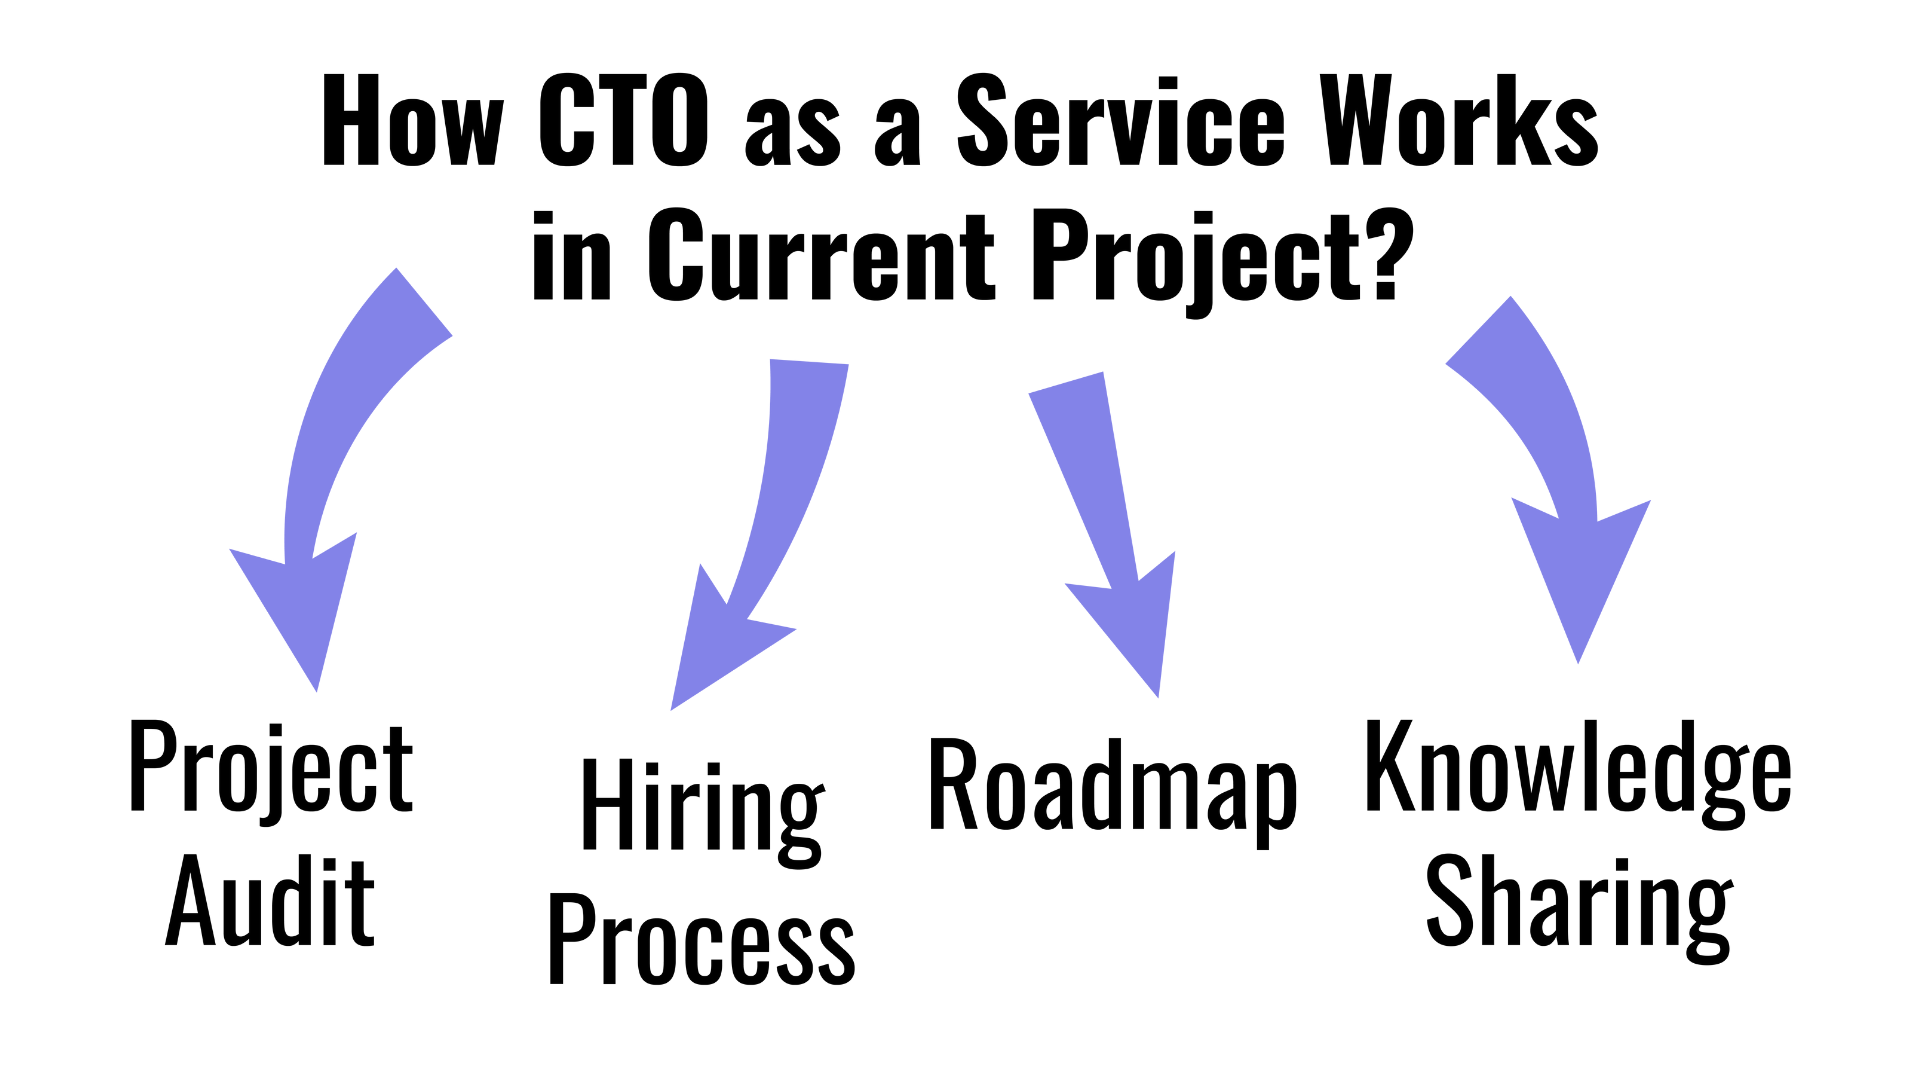 CTO as a Service Work in a Current Project